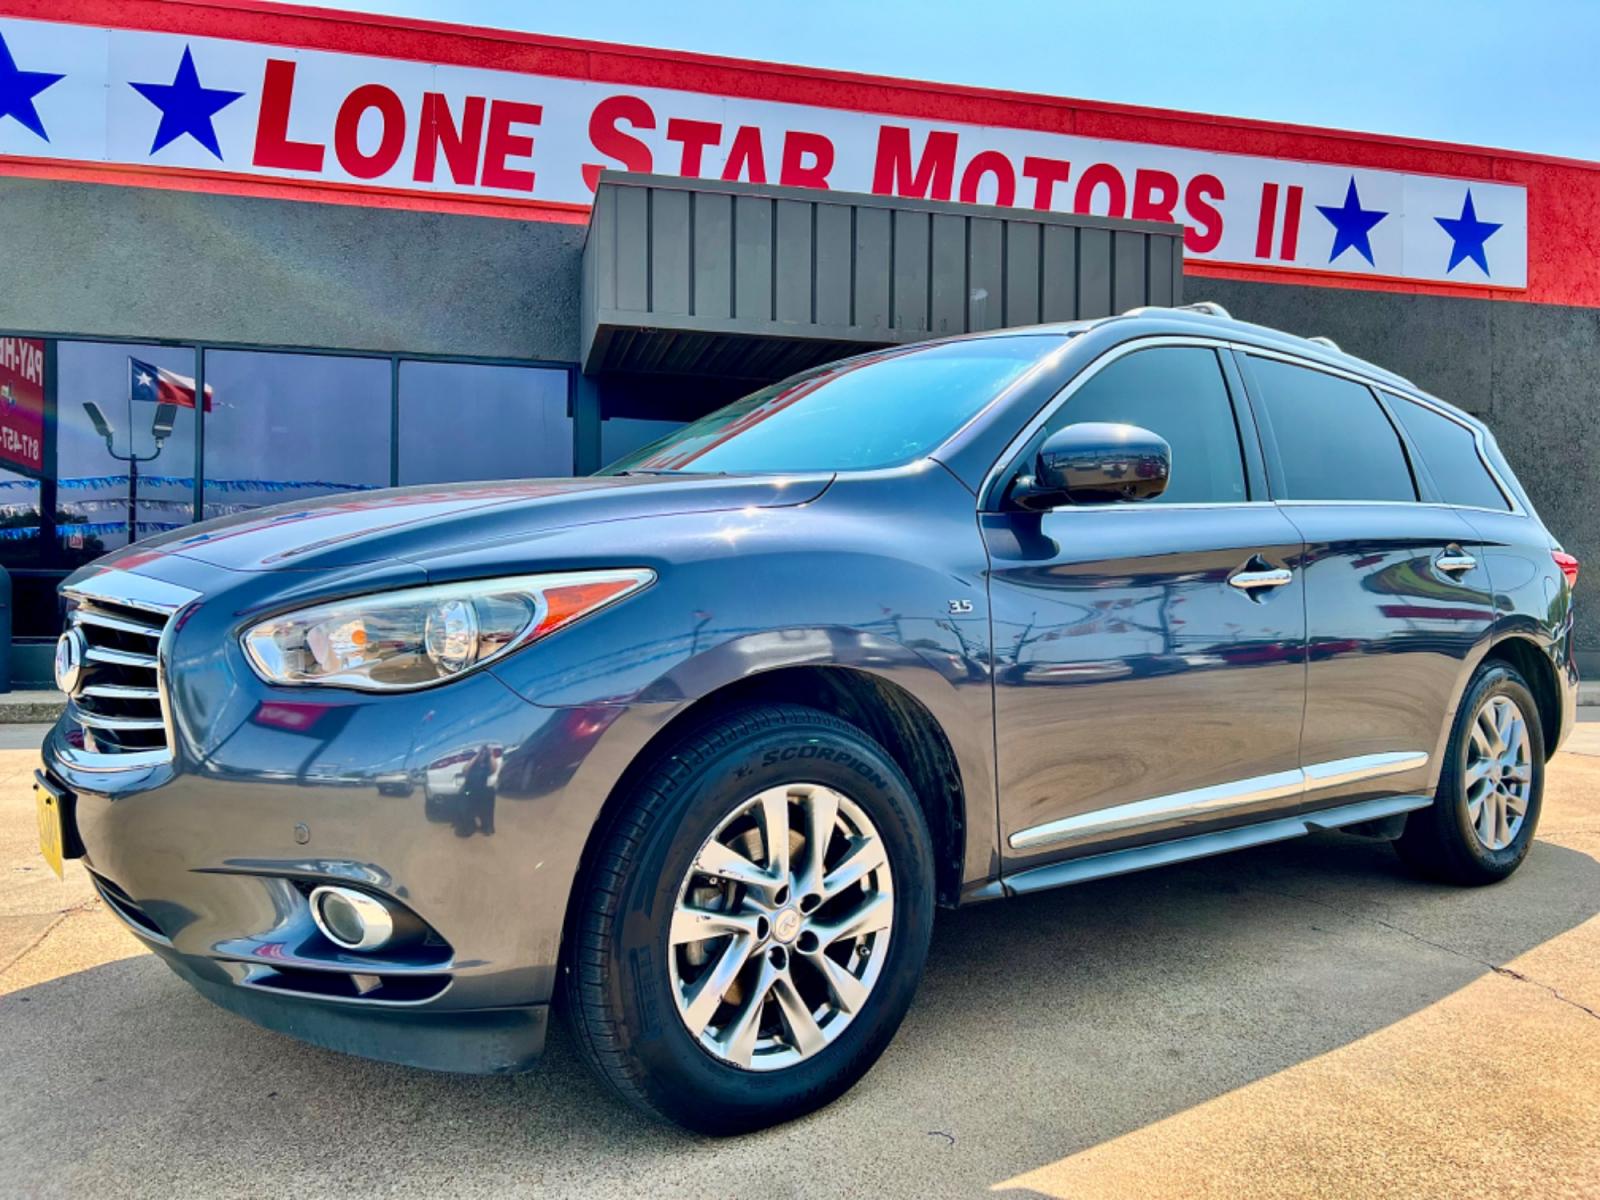 2014 GRAY INFINITI QX60 (5N1AL0MN1EC) , located at 5900 E. Lancaster Ave., Fort Worth, TX, 76112, (817) 457-5456, 0.000000, 0.000000 - This is a 2014 INFINITI QX60 4 DOOR SUV that is in excellent condition. There are no dents or scratches. The interior is clean with no rips or tears or stains. All power windows, door locks and seats. Ice cold AC for those hot Texas summer days. It is equipped with a CD player, AM/FM radio, AUX port - Photo #1